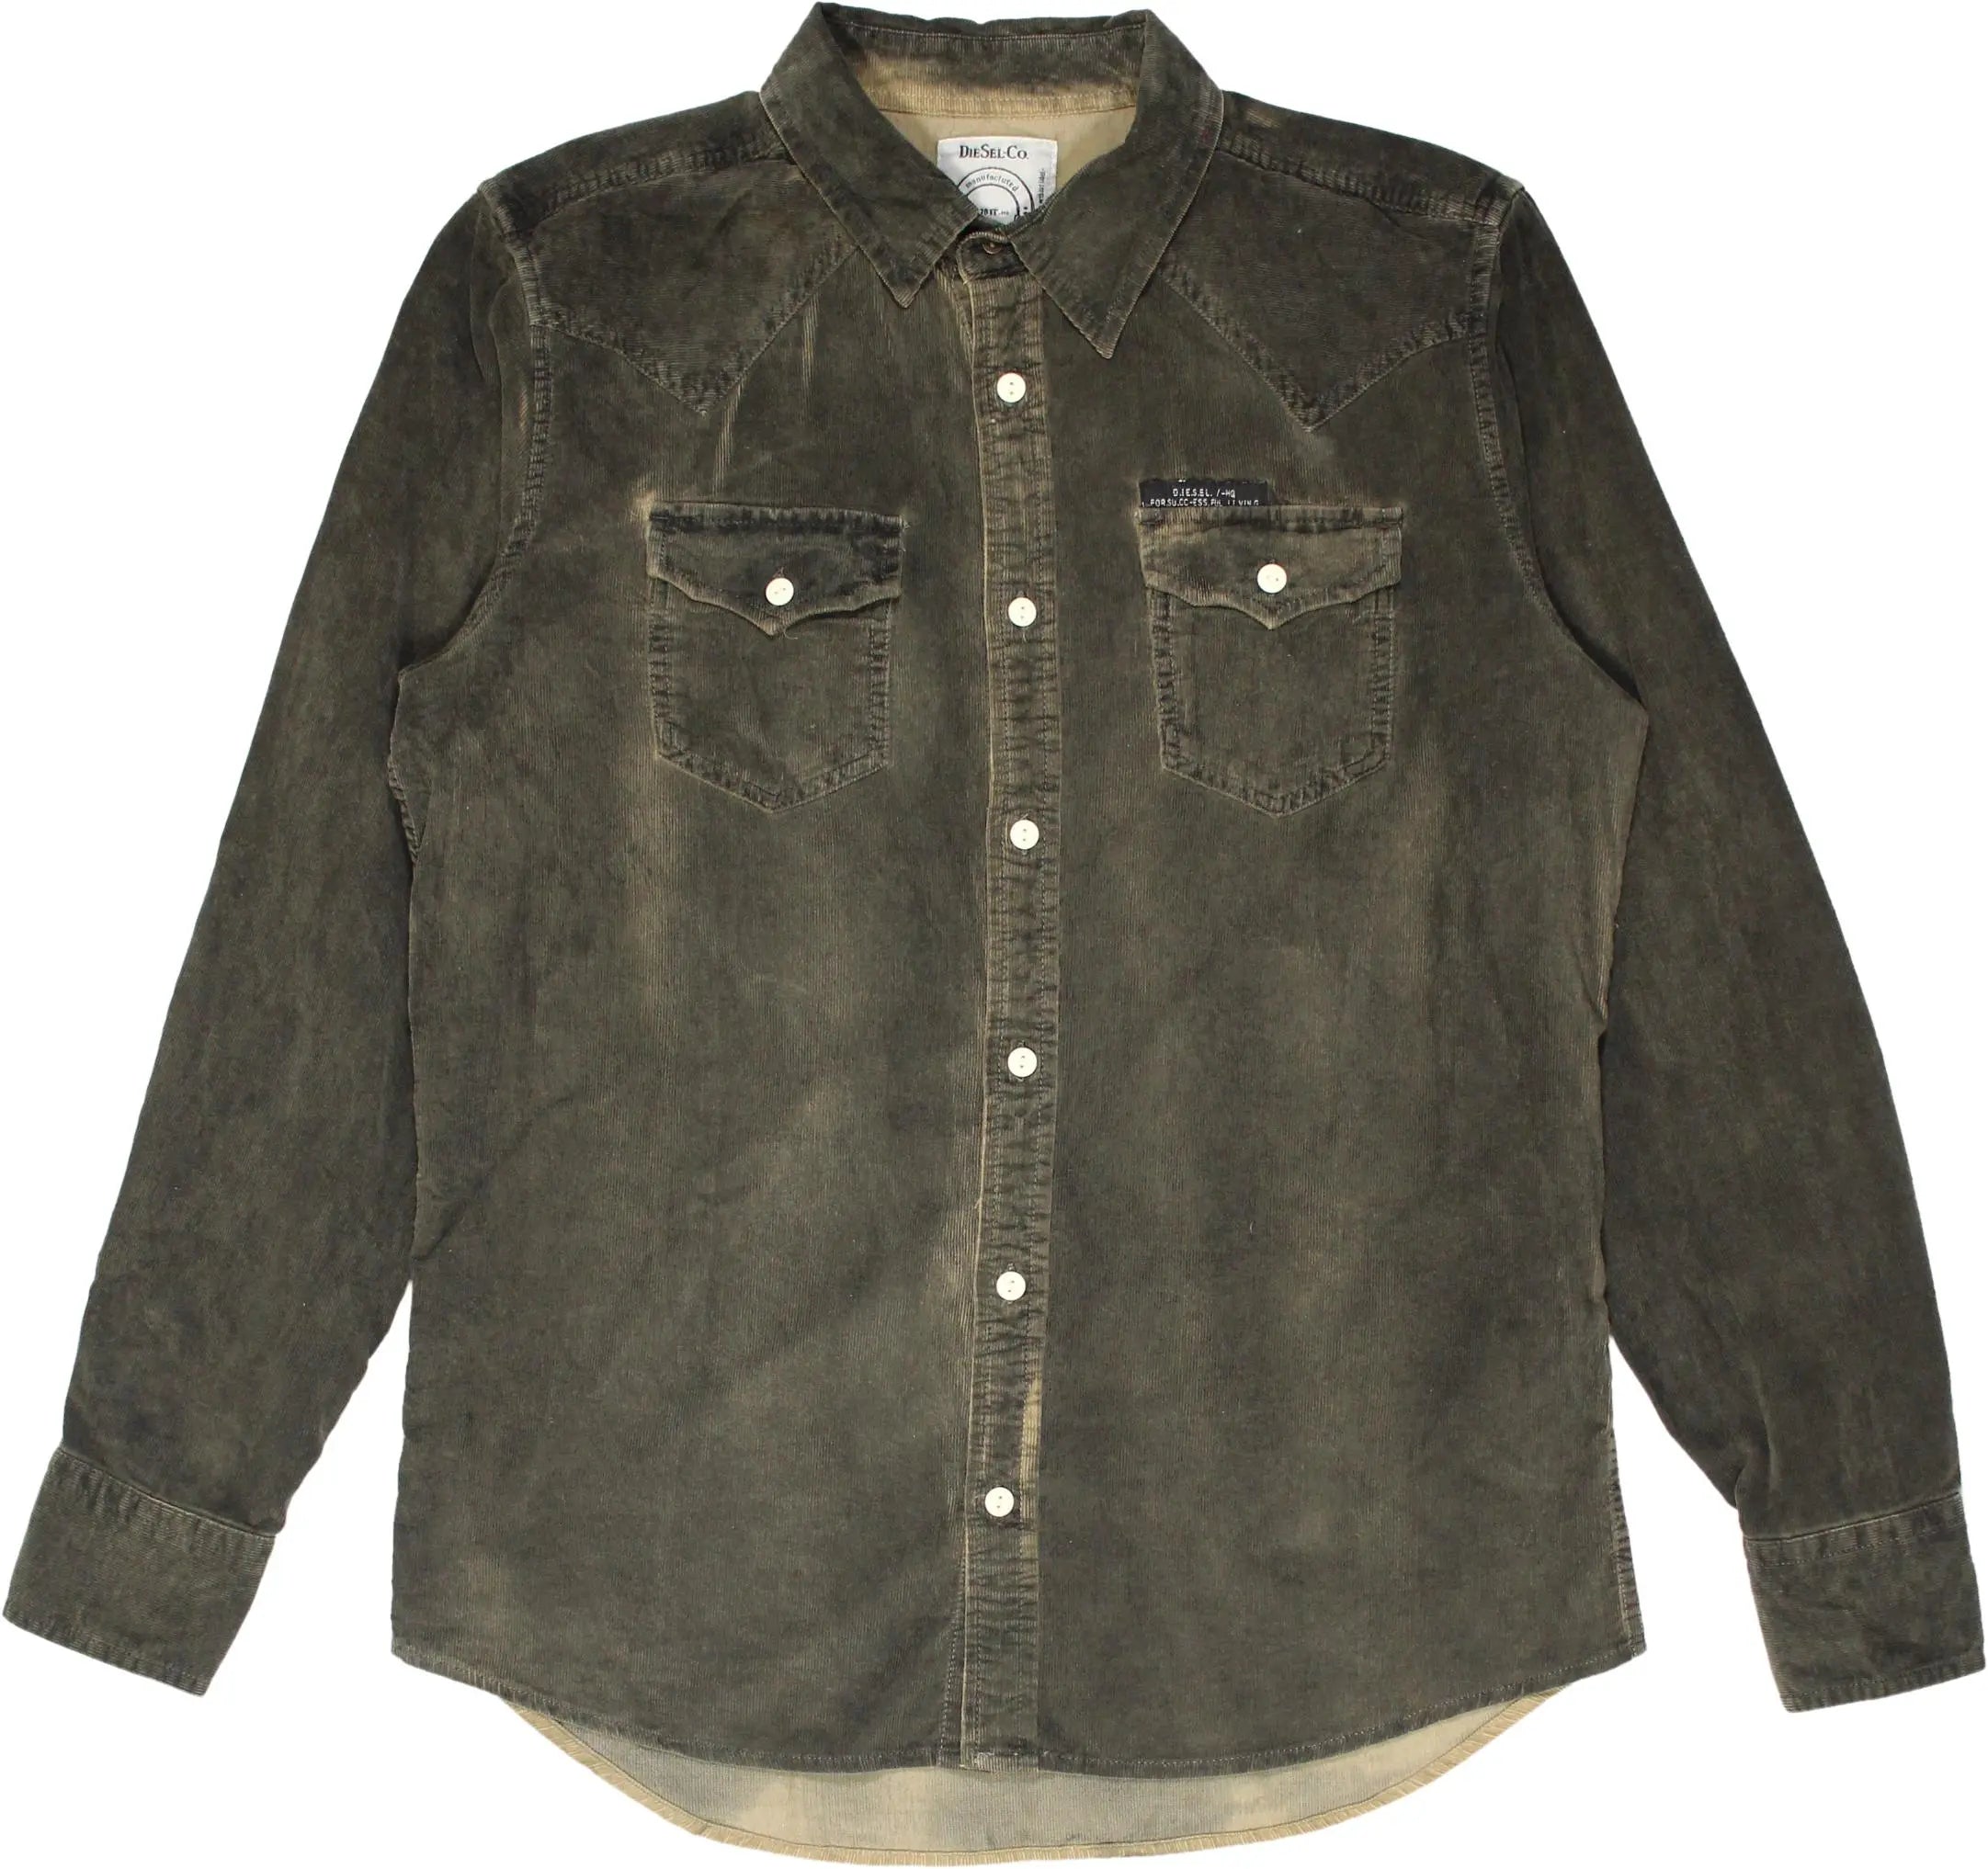 Diesel - Diesel shirt- ThriftTale.com - Vintage and second handclothing